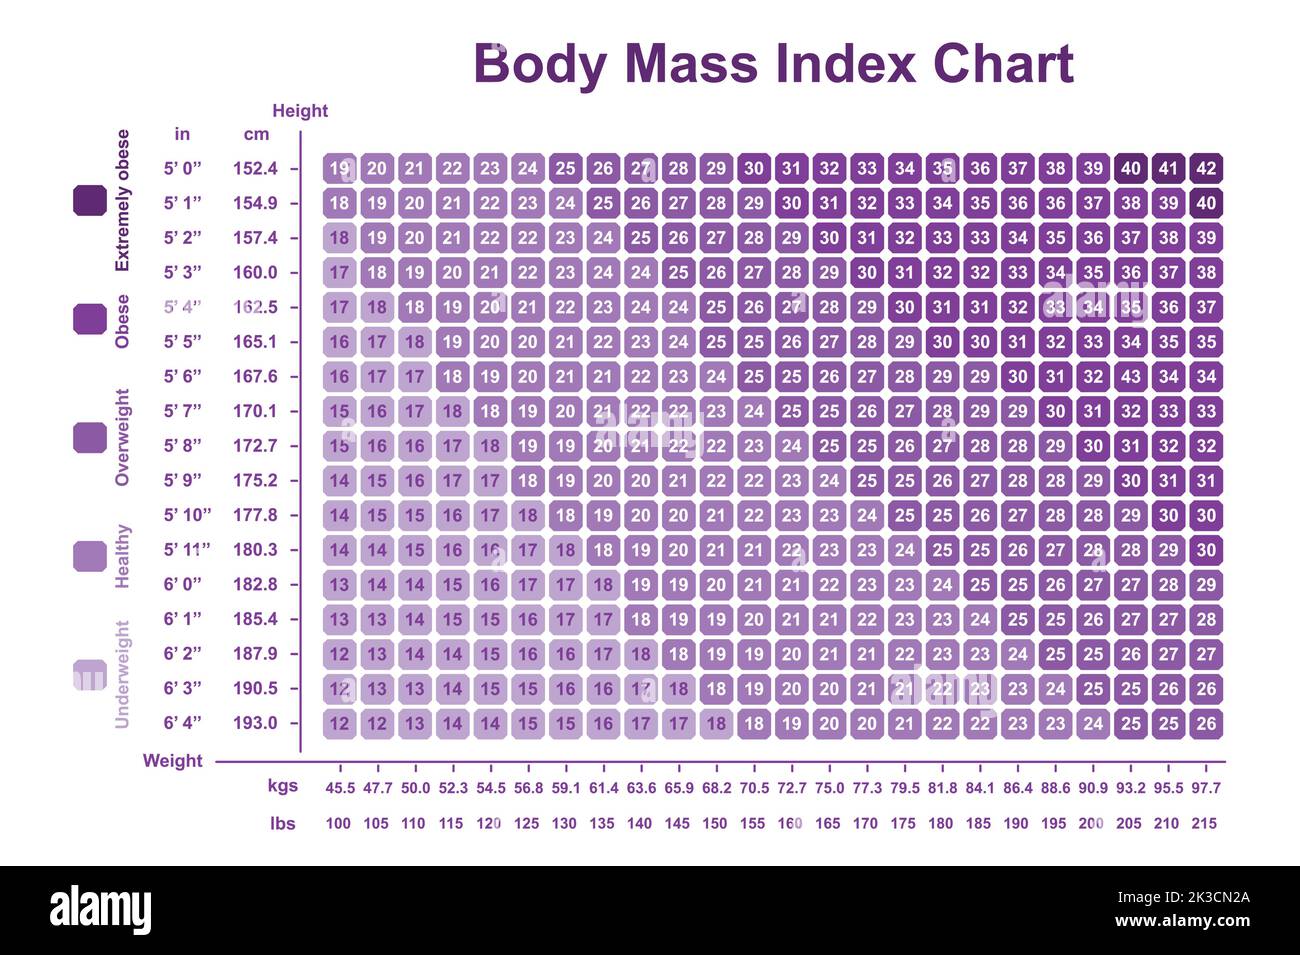 https://c8.alamy.com/comp/2K3CN2A/body-mass-index-bmi-chart-bmi-calculator-to-checking-your-body-mass-index-colorful-symbols-vector-illustration-2K3CN2A.jpg